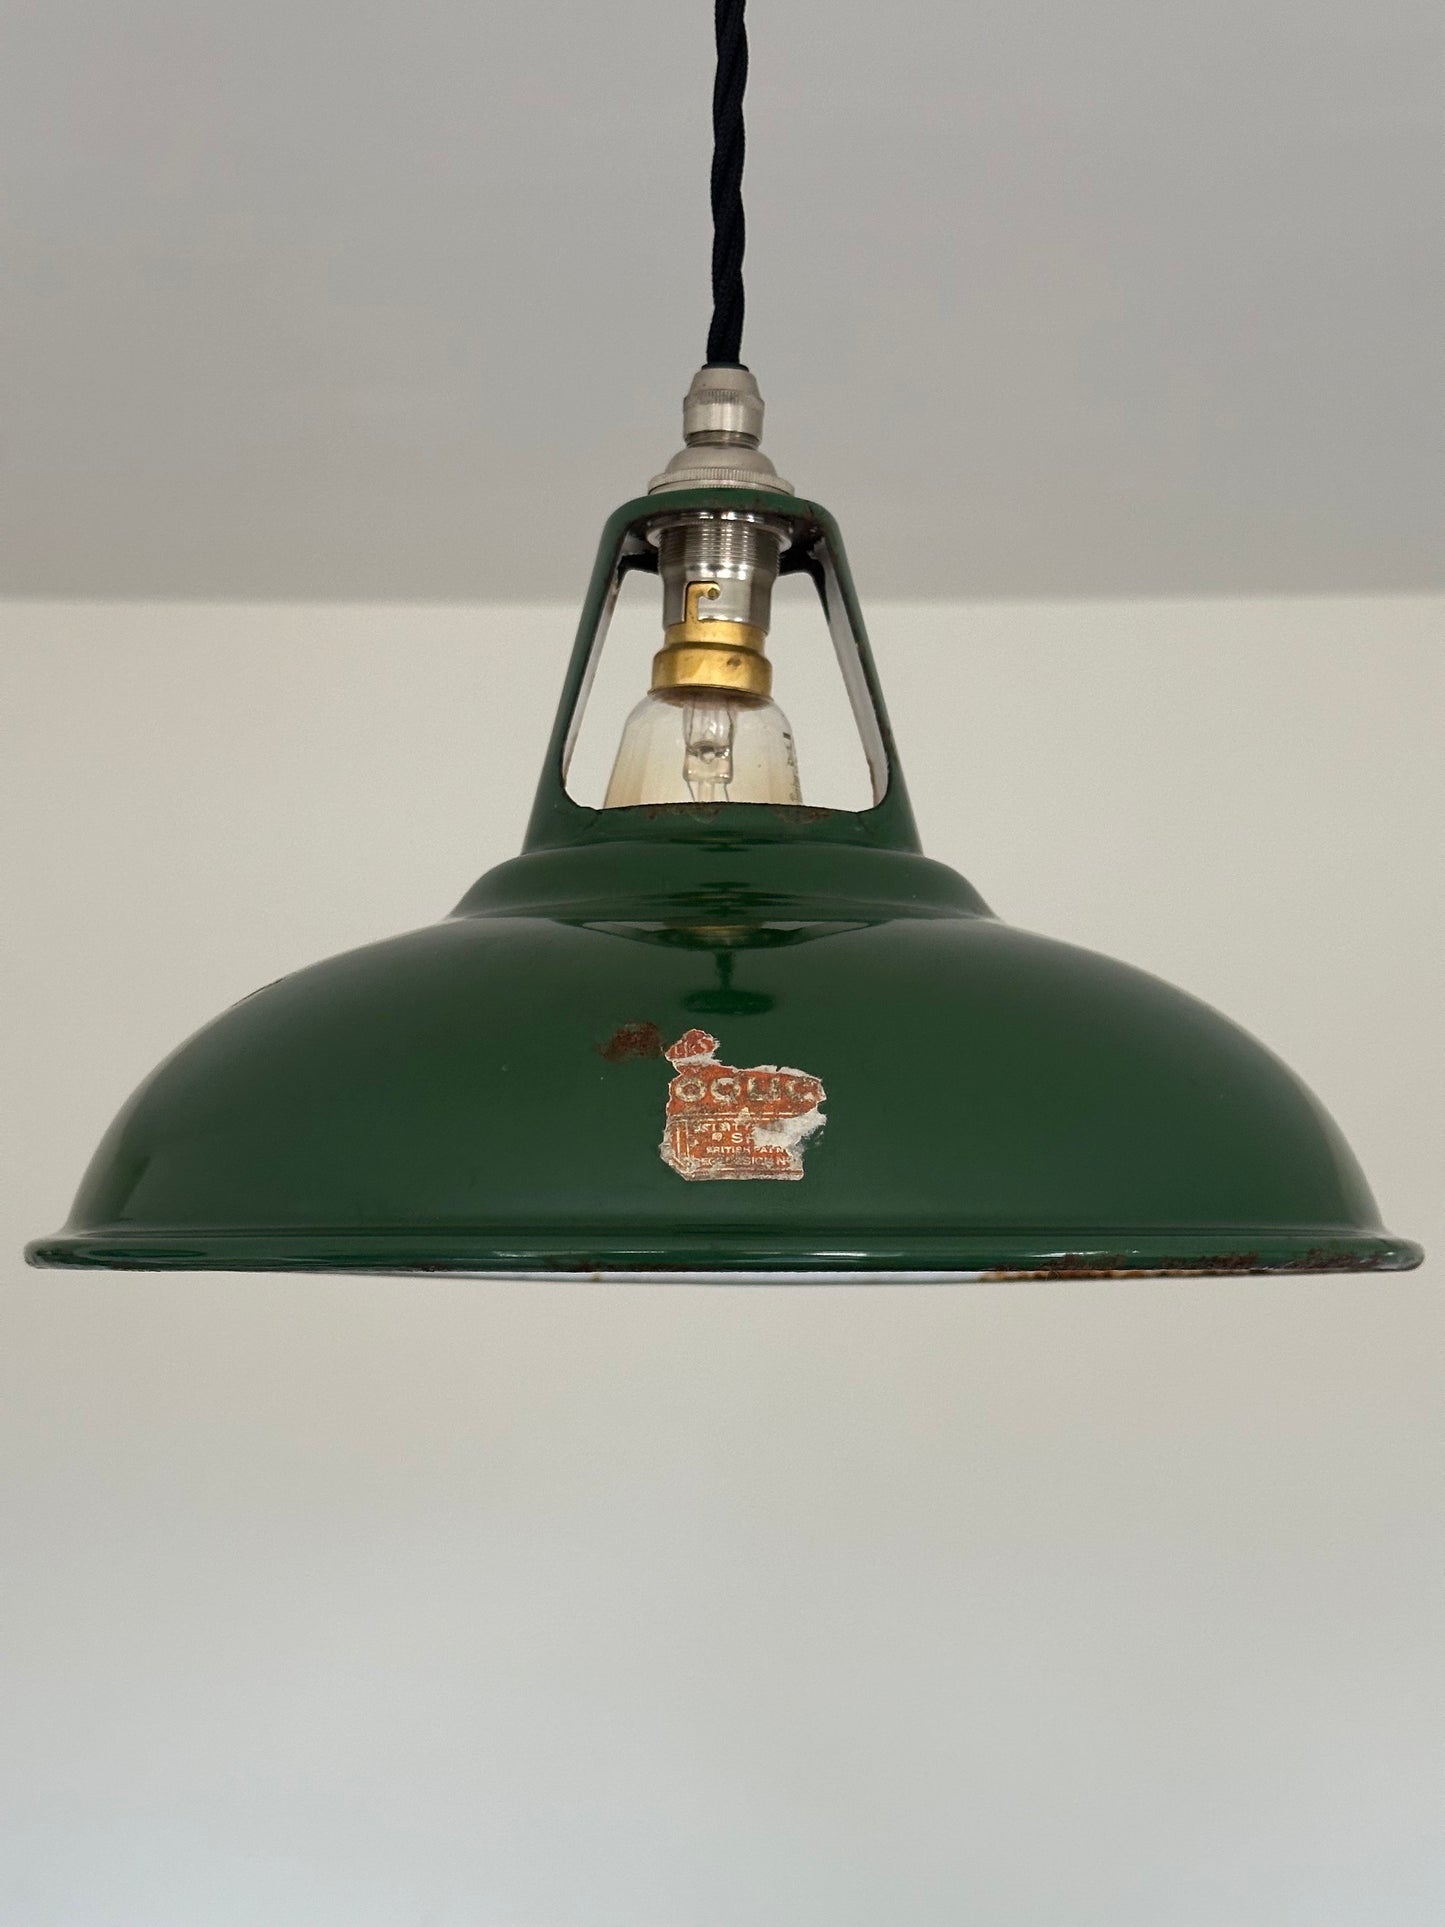 Geniune Green Solid Coolicon 1932 Shade Pendant Set Light 11 Inch | Ceiling Dining Room | Kitchen Table | Vintage Filament Bulb